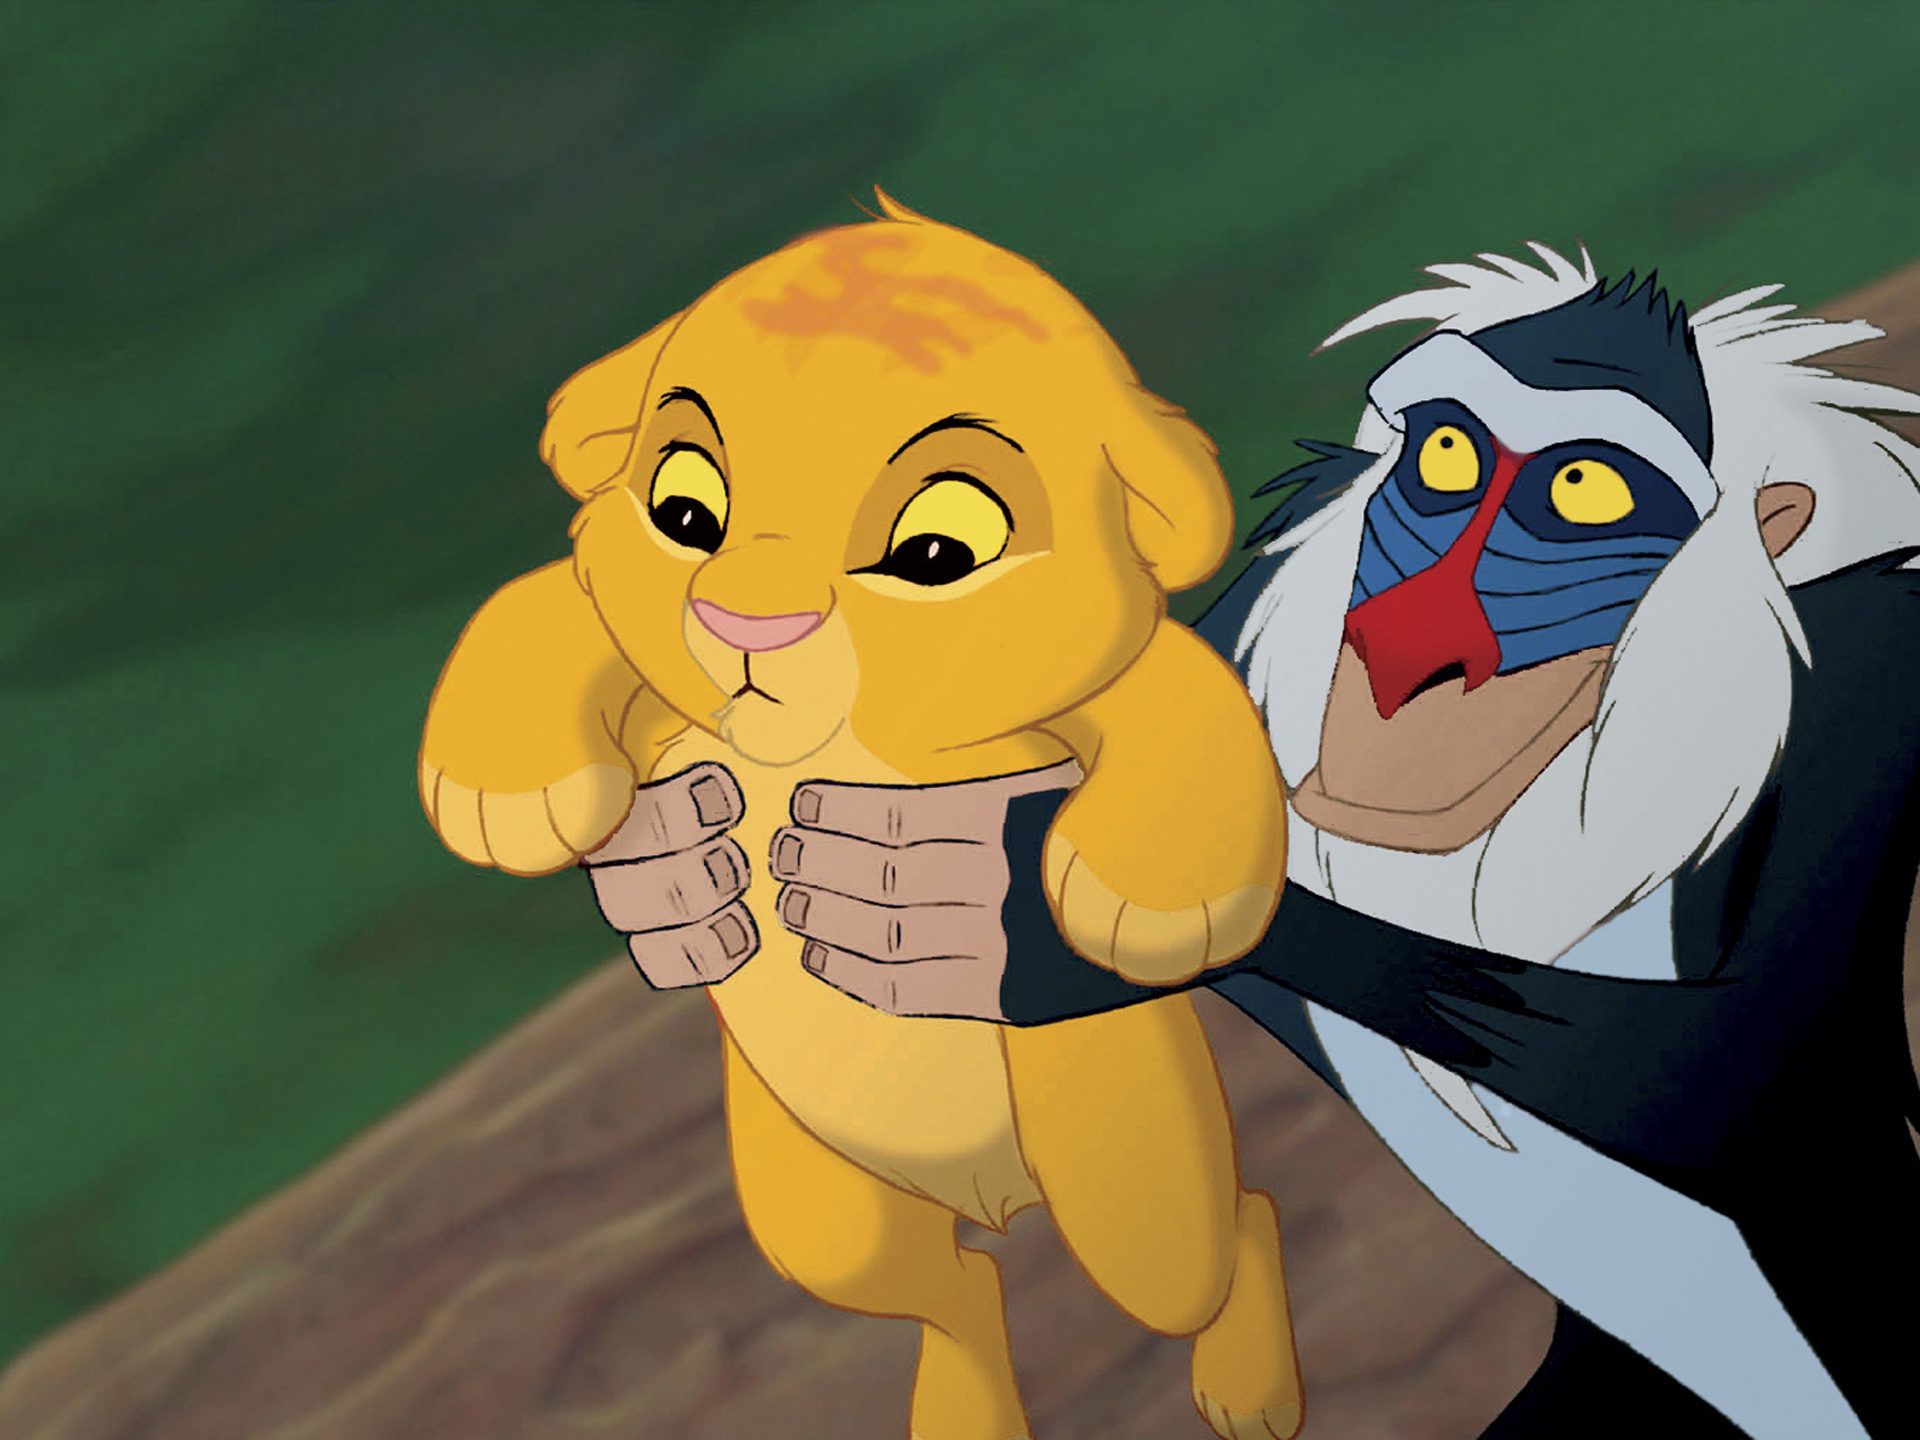 A lion and monkey are holding hands - The Lion King